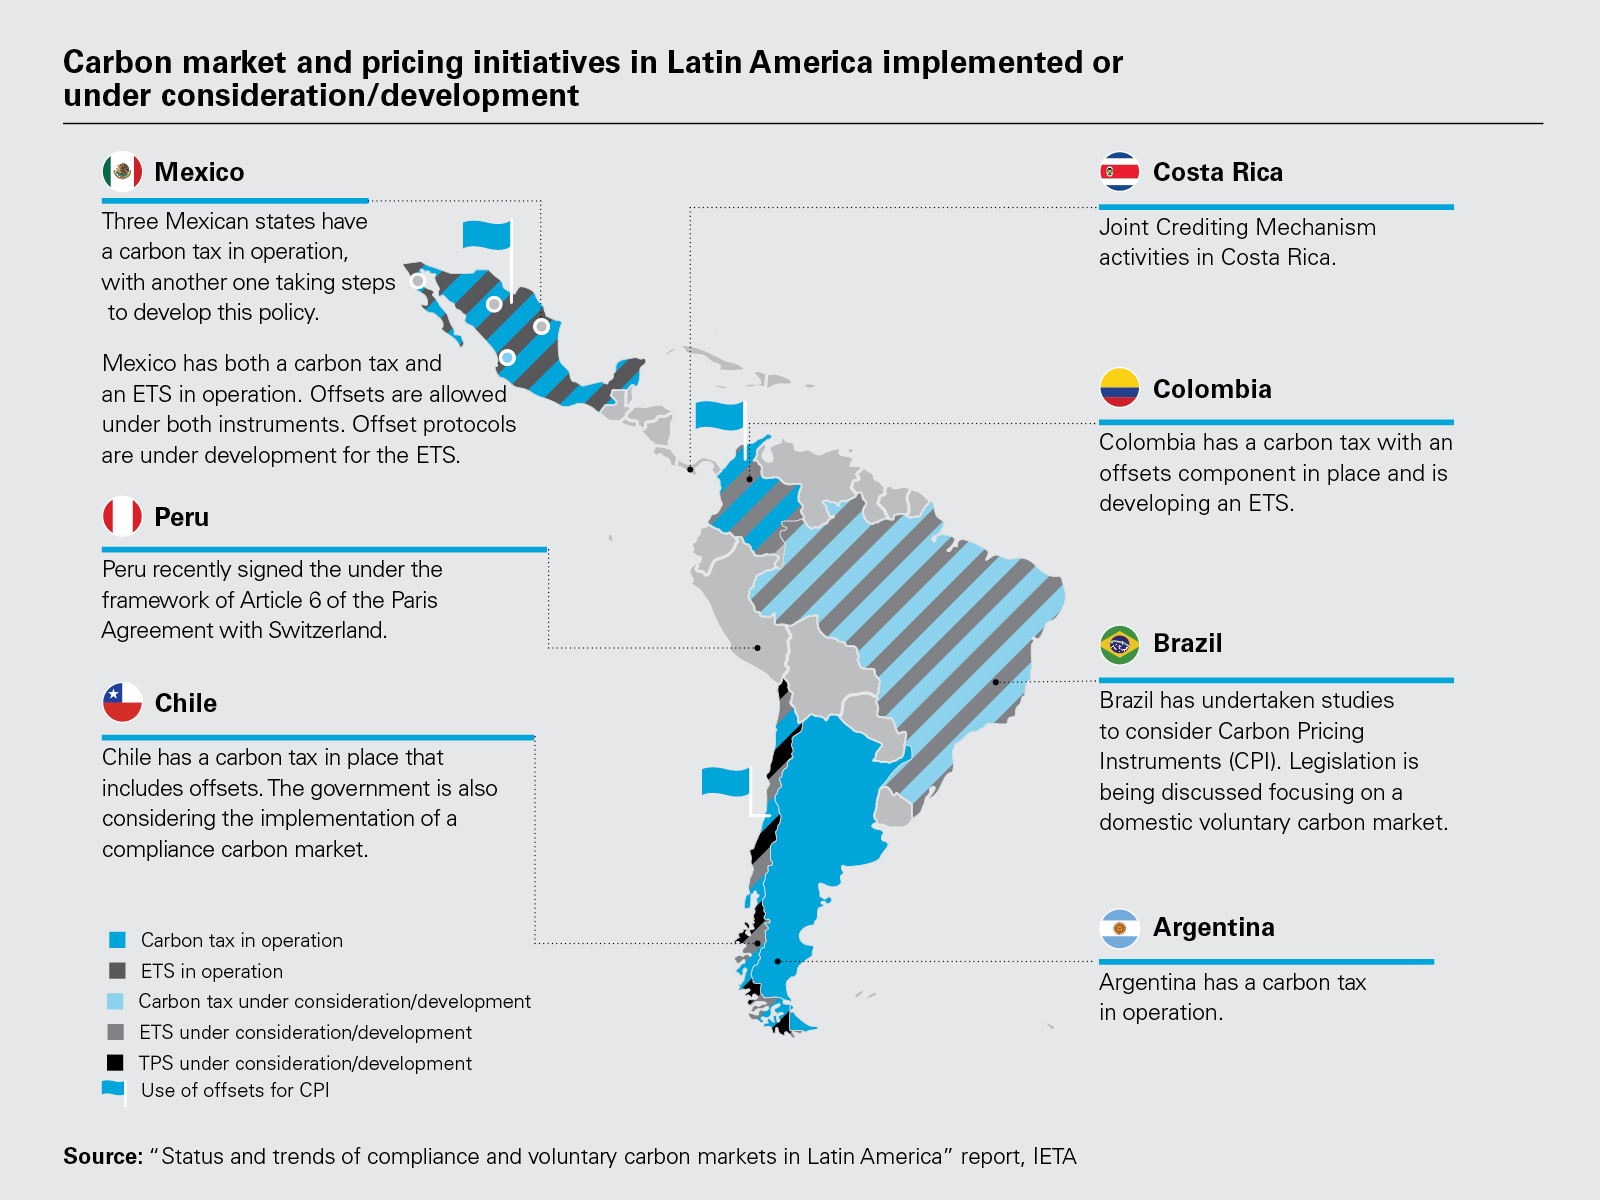 Carbon market and pricing initiatives in Latin America implemented or under consideration/development